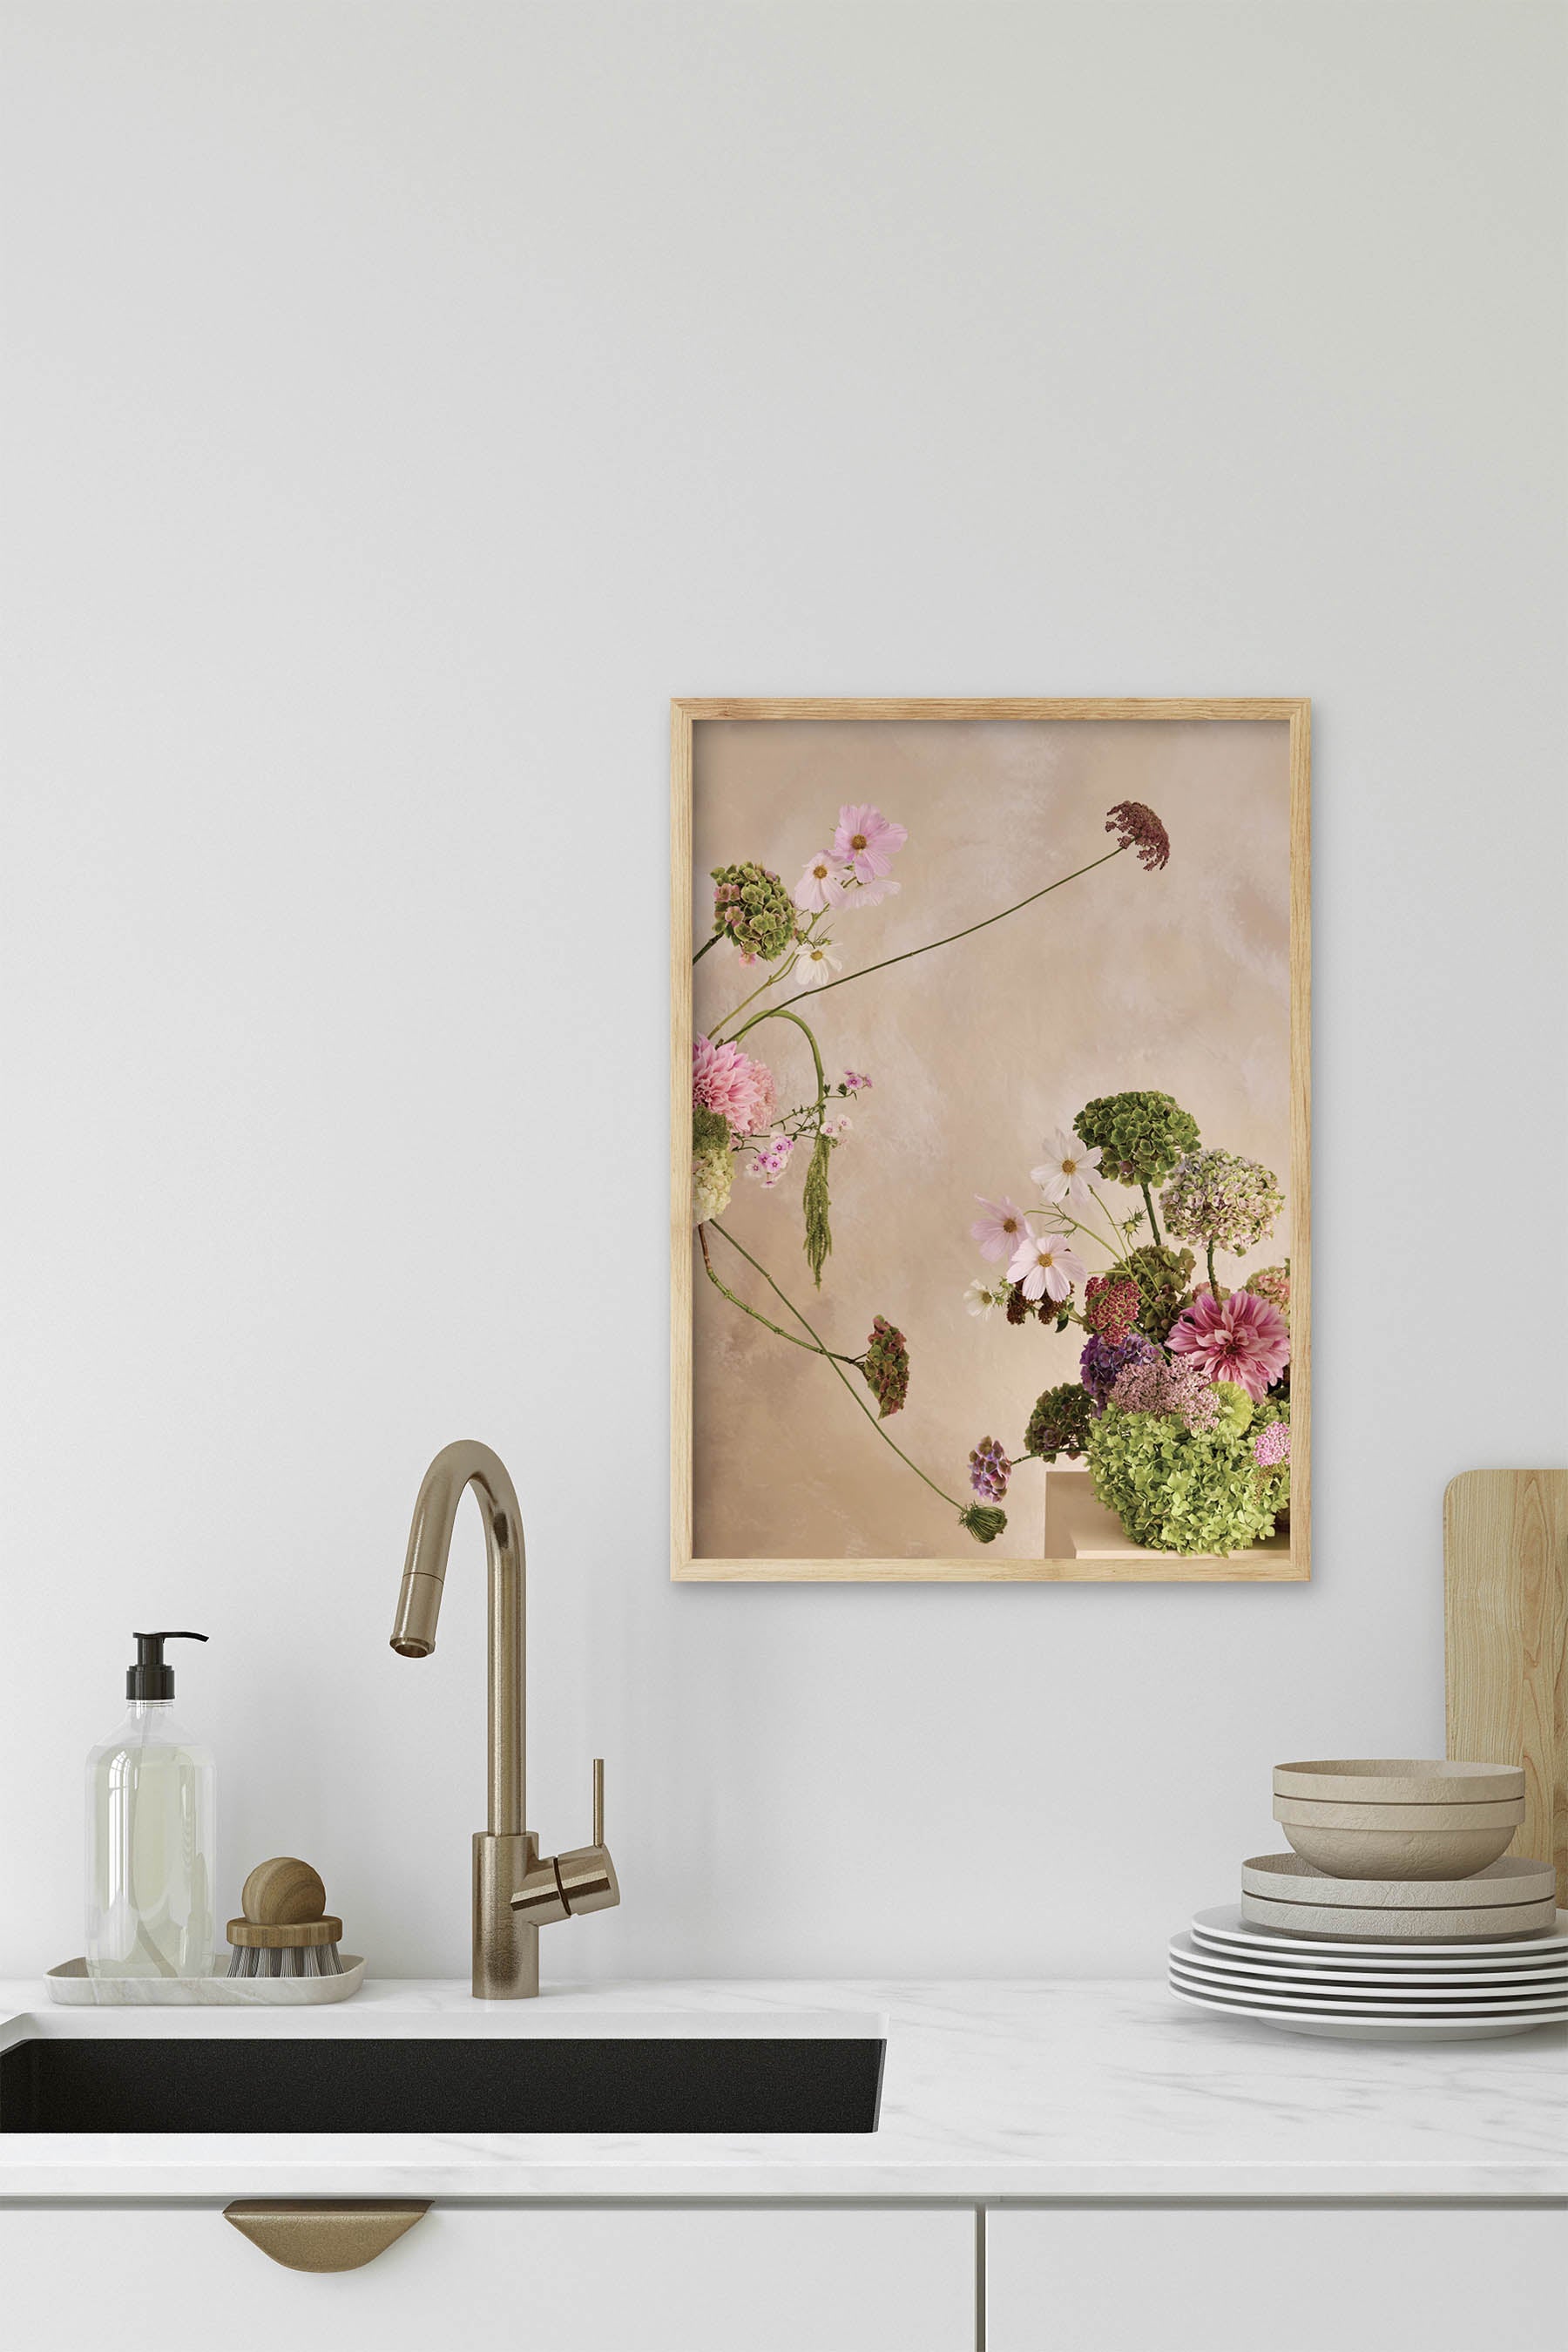 Whimsical Floral Abstract Arrangement against a Linen colour hand painted background Fine Art Print By Austin Bloom size A3 framed in a light oak timber fame in a modern kitchen with a white marble countertop and aged brass hardware.